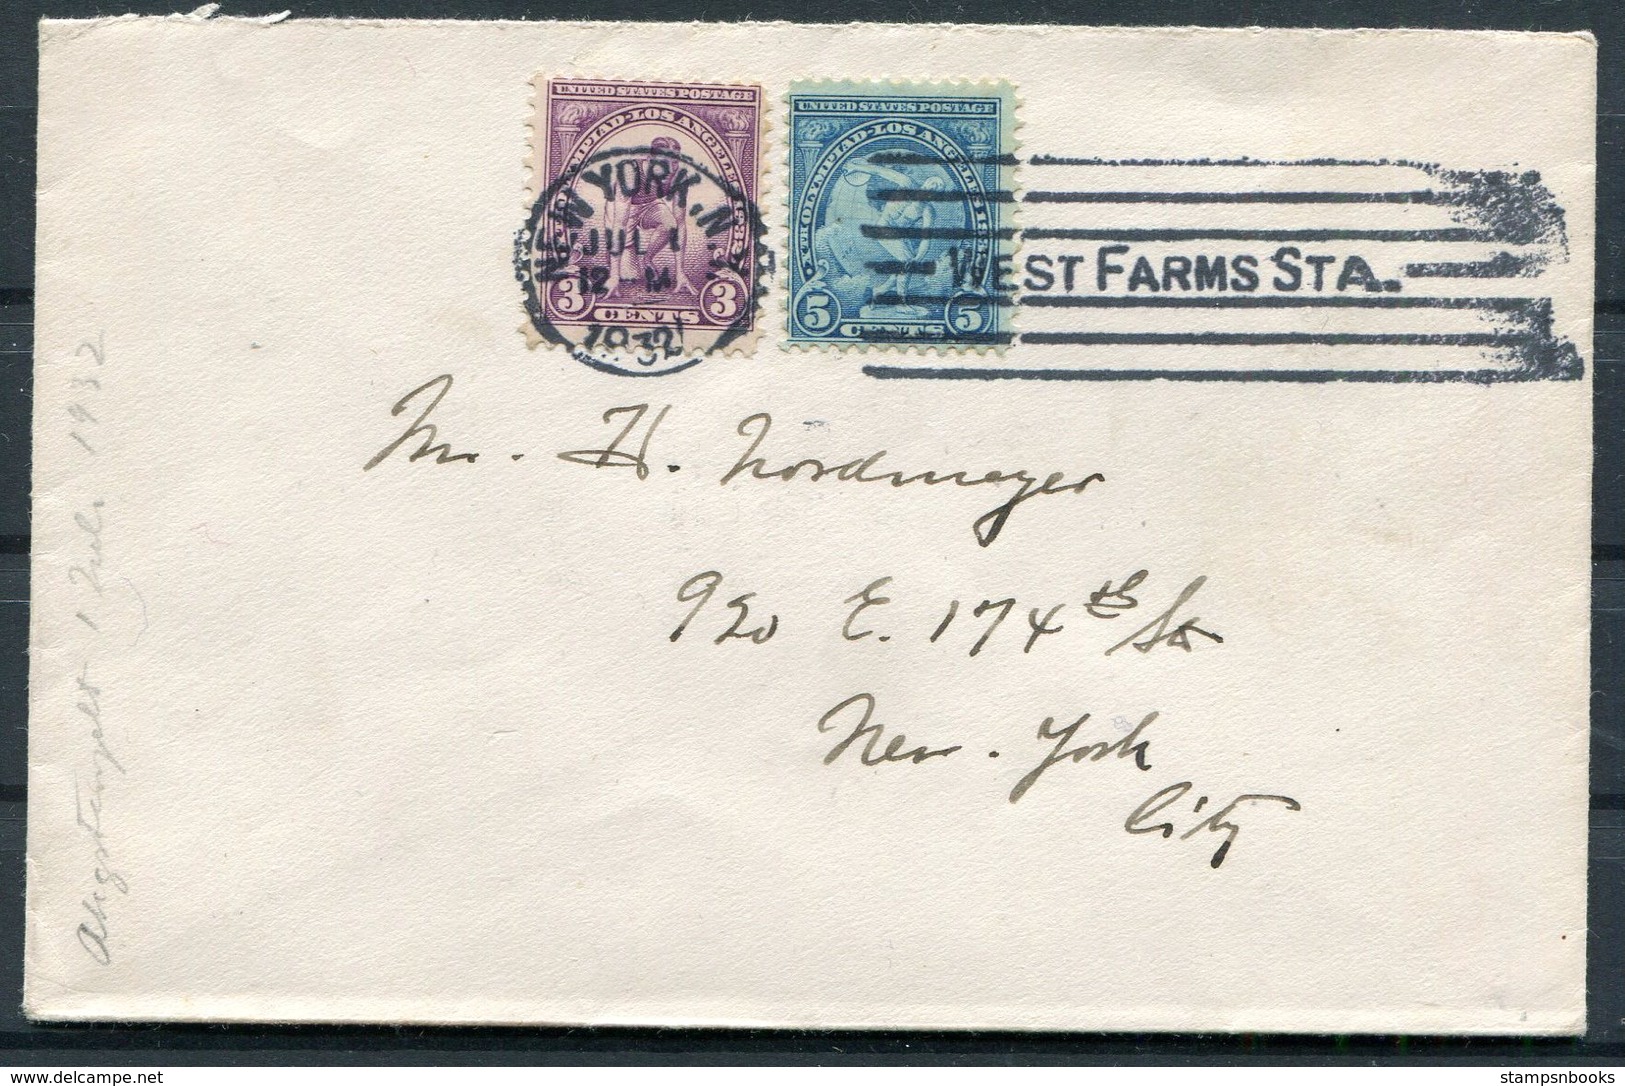 1932 USA St Moritz Hotel, New York Cover, West Farm Station, Los Angeles Olympics 3c + 5c - Covers & Documents